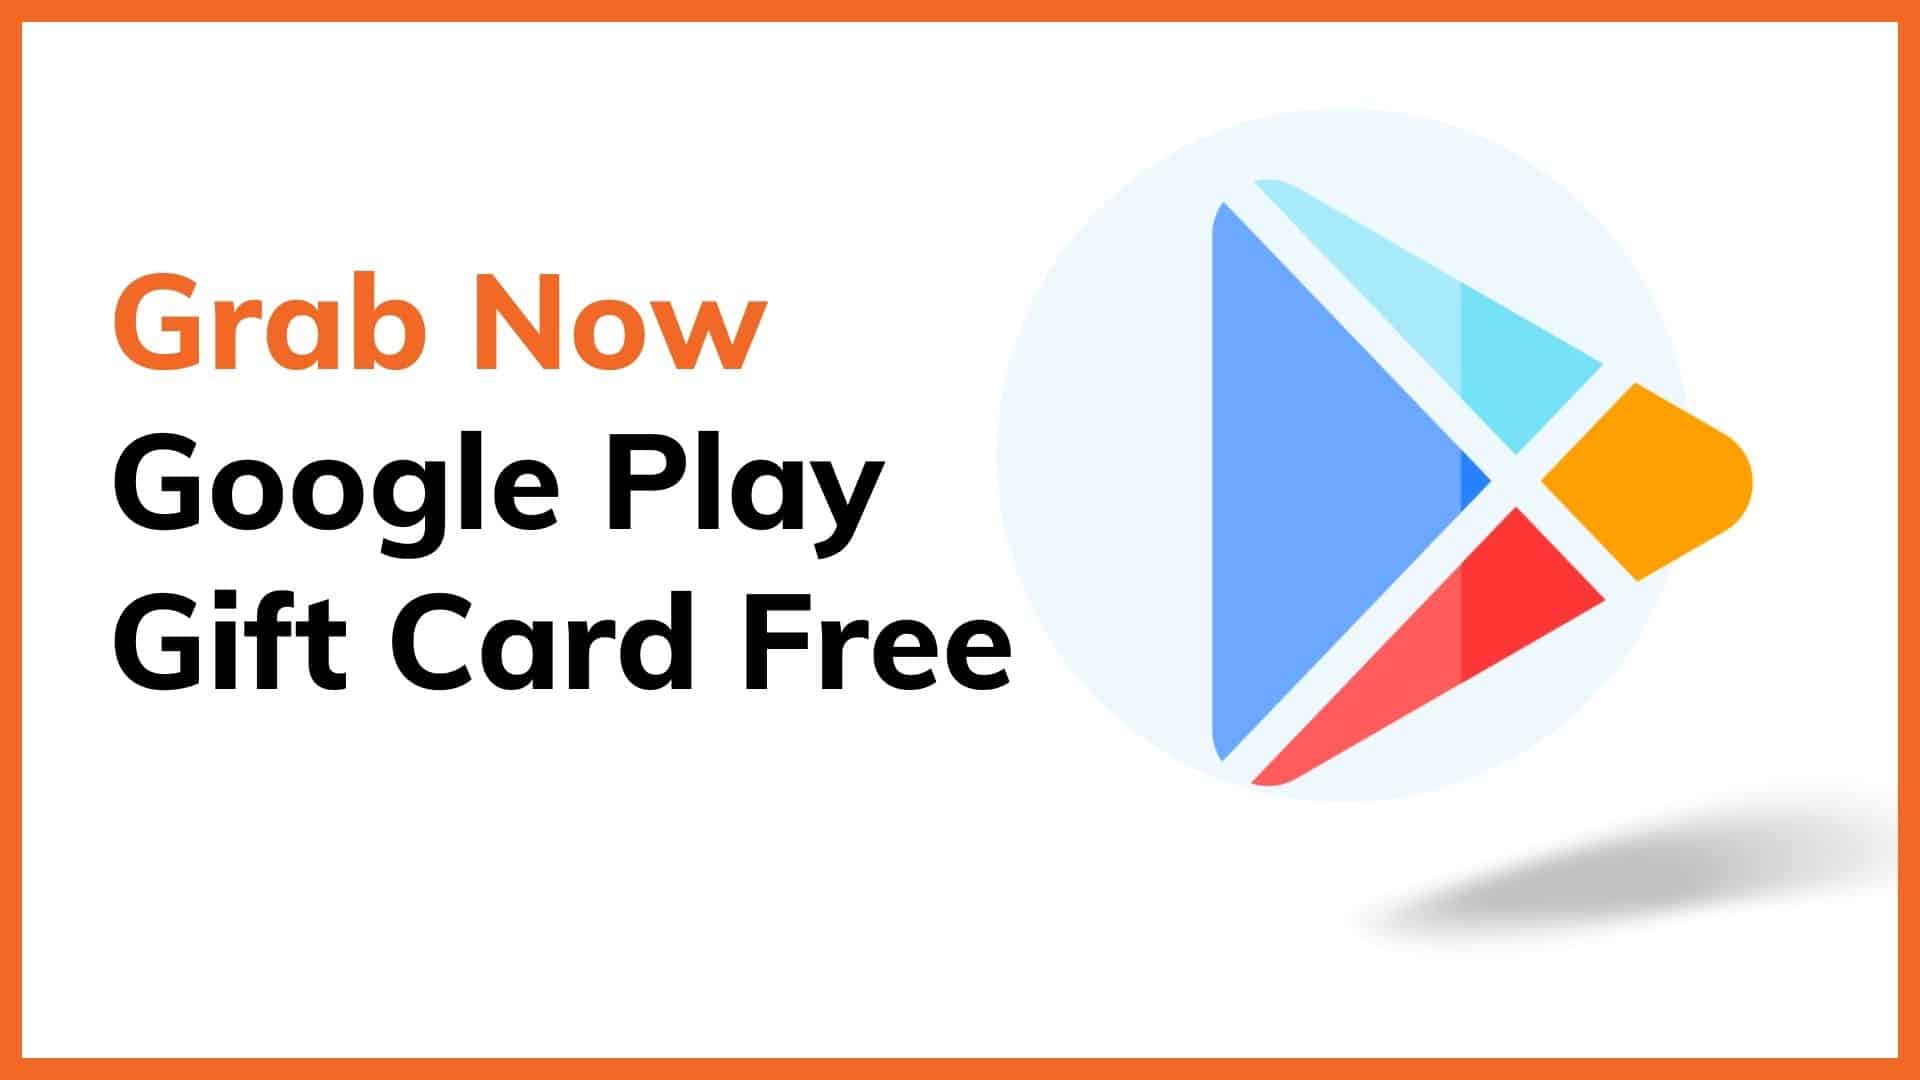 Free Google Play Promo Codes 2023 (updated daily)